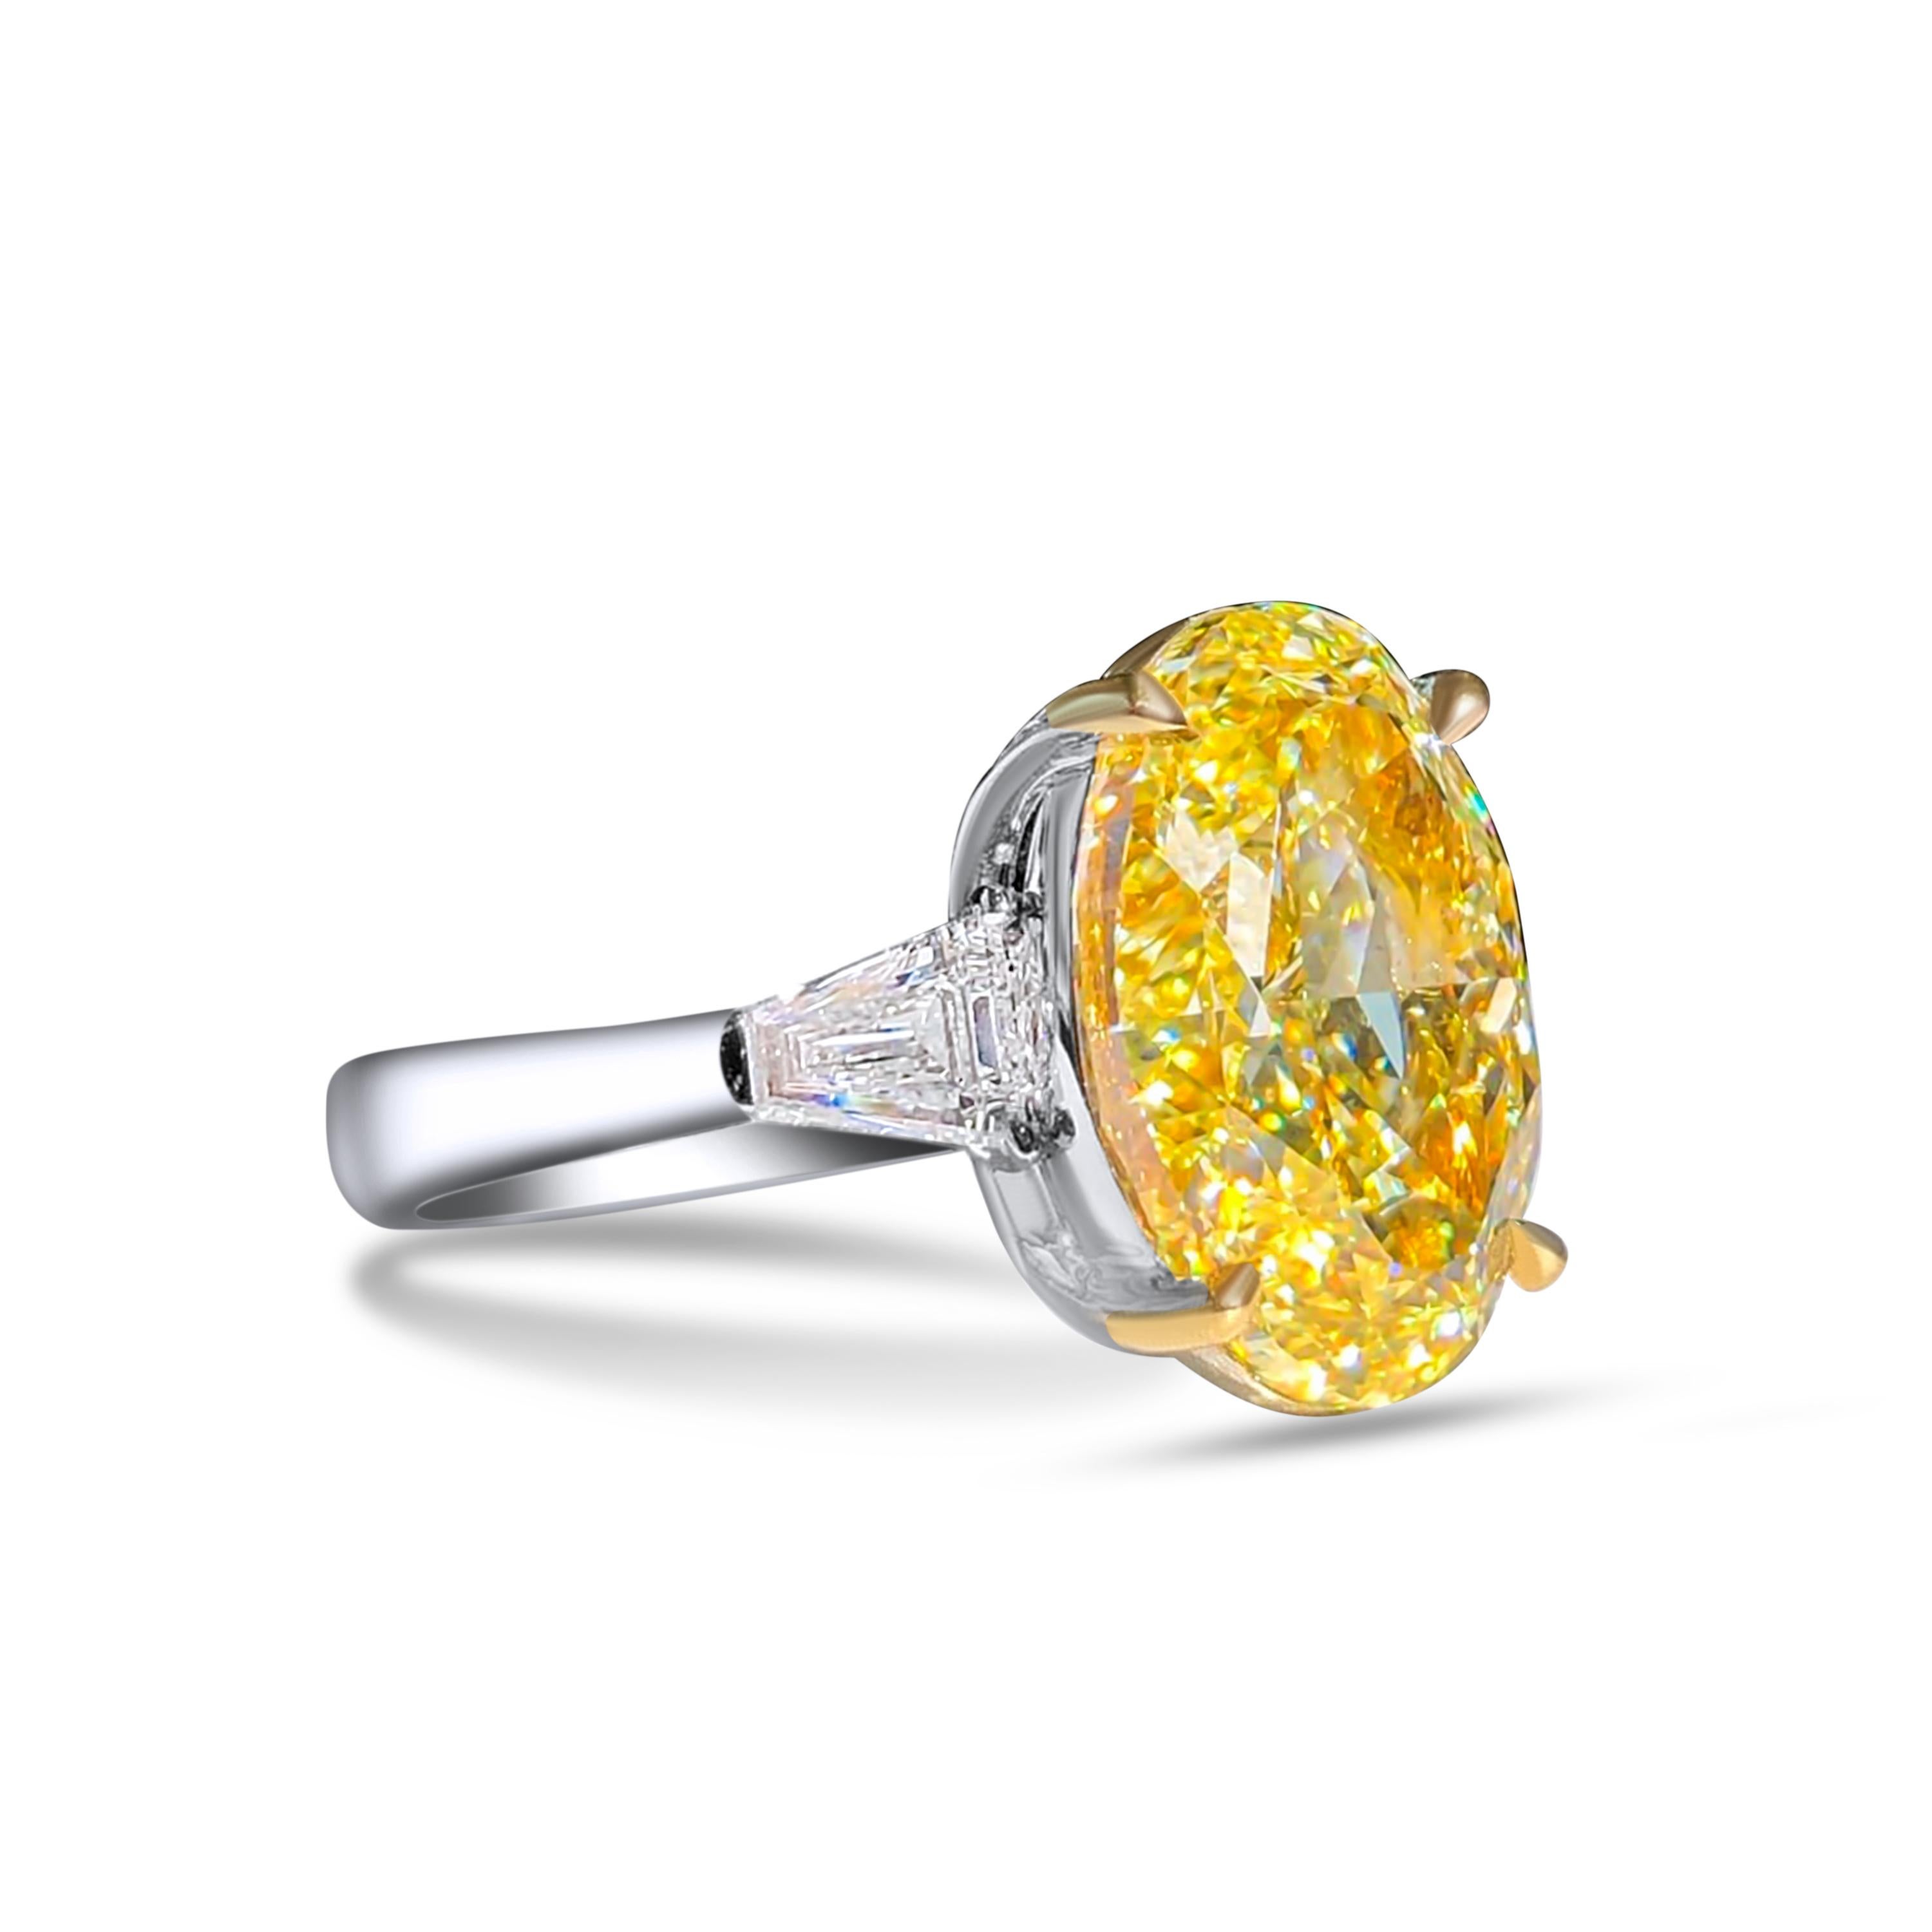 We invite you to discover this elegant and majestic engagement ring set with a 10 carats GIA certified Fancy Yellow oval diamond accented with two diamond baguette cut colorless diamonds. 

New ring 
Main diamond: Fancy Yellow 10,01 carats VS2 GIA